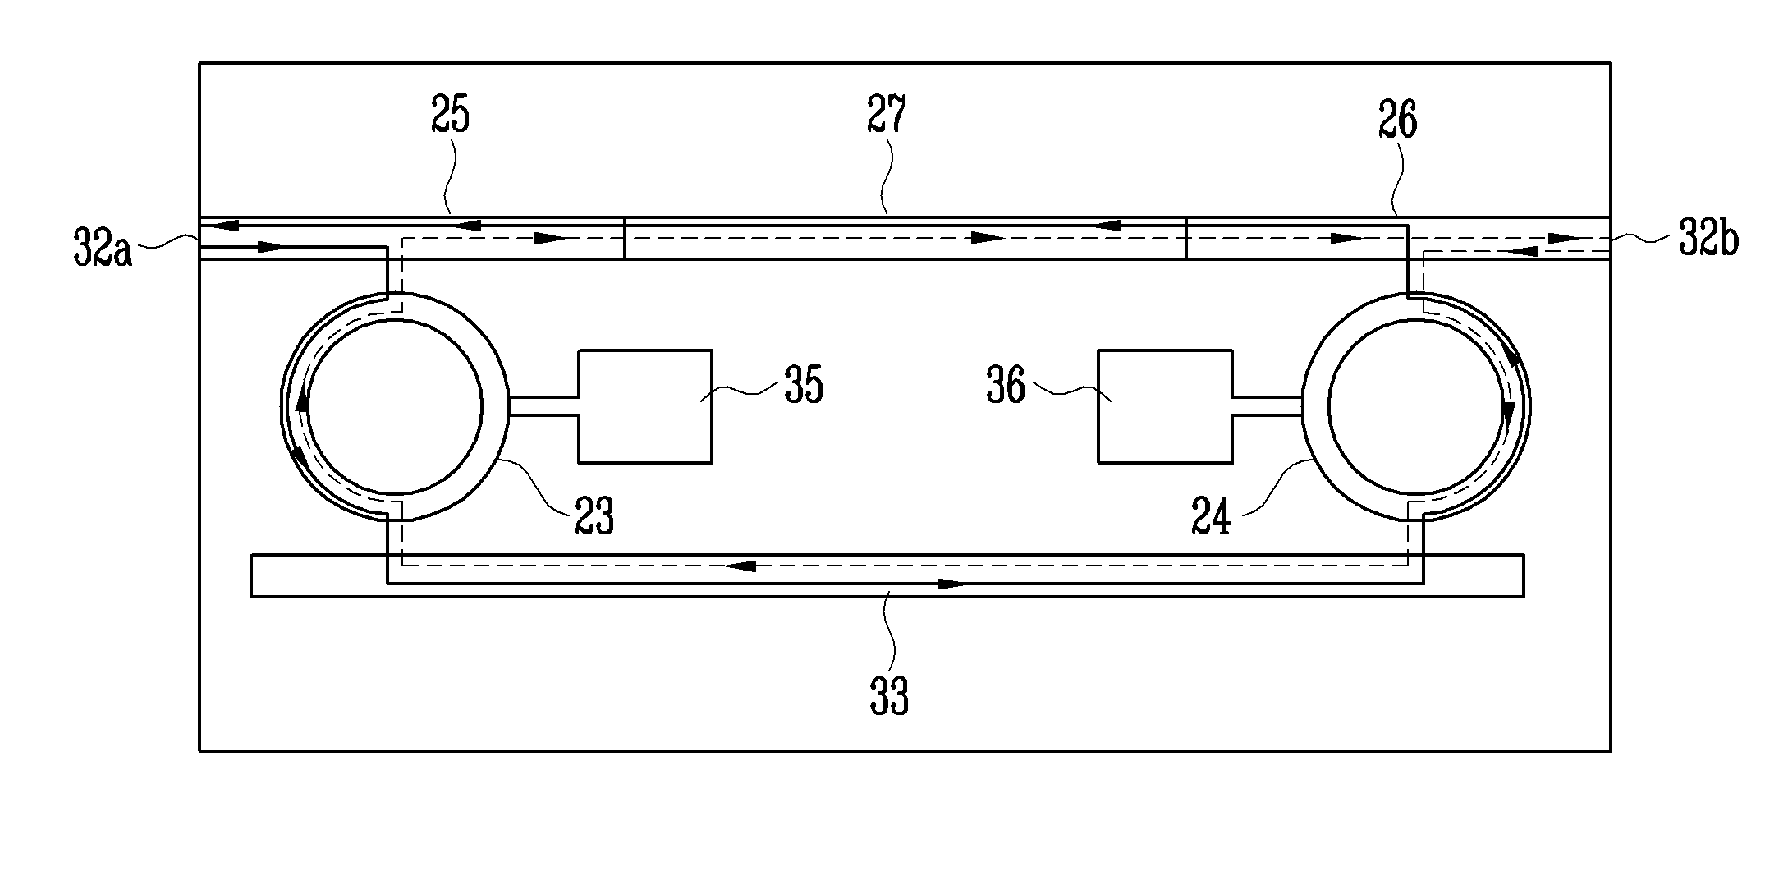 Wavelength tunable laser diode using double coupled ring resonator